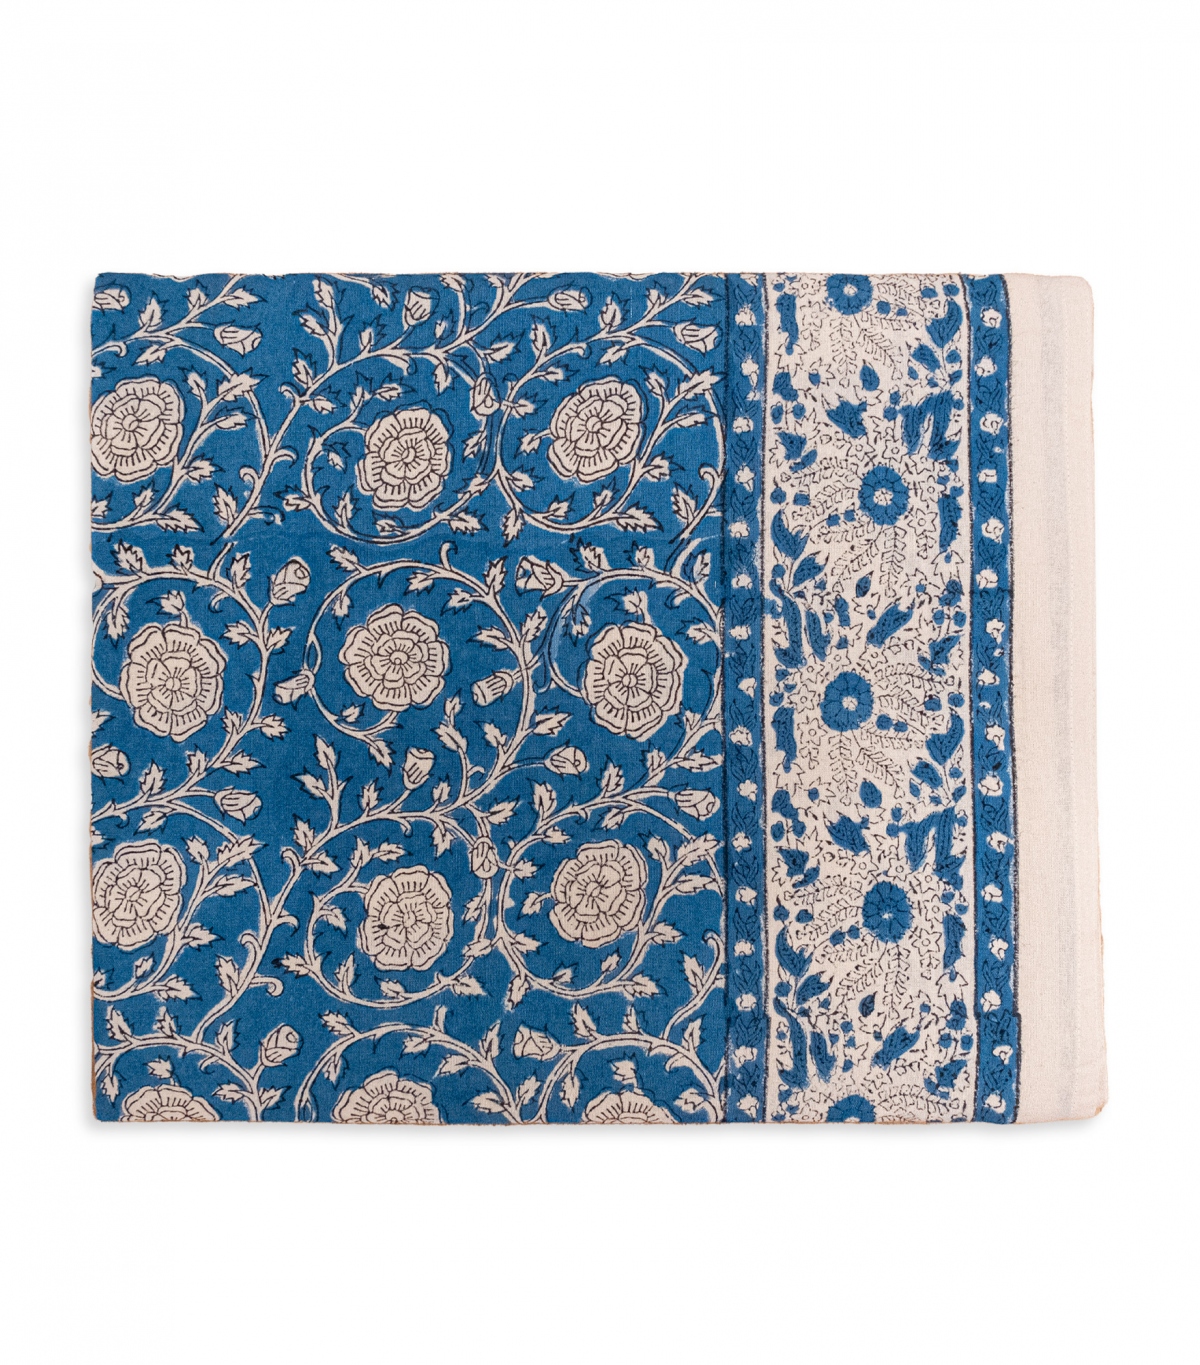 Cotton table cloth 69x138 inches - blue